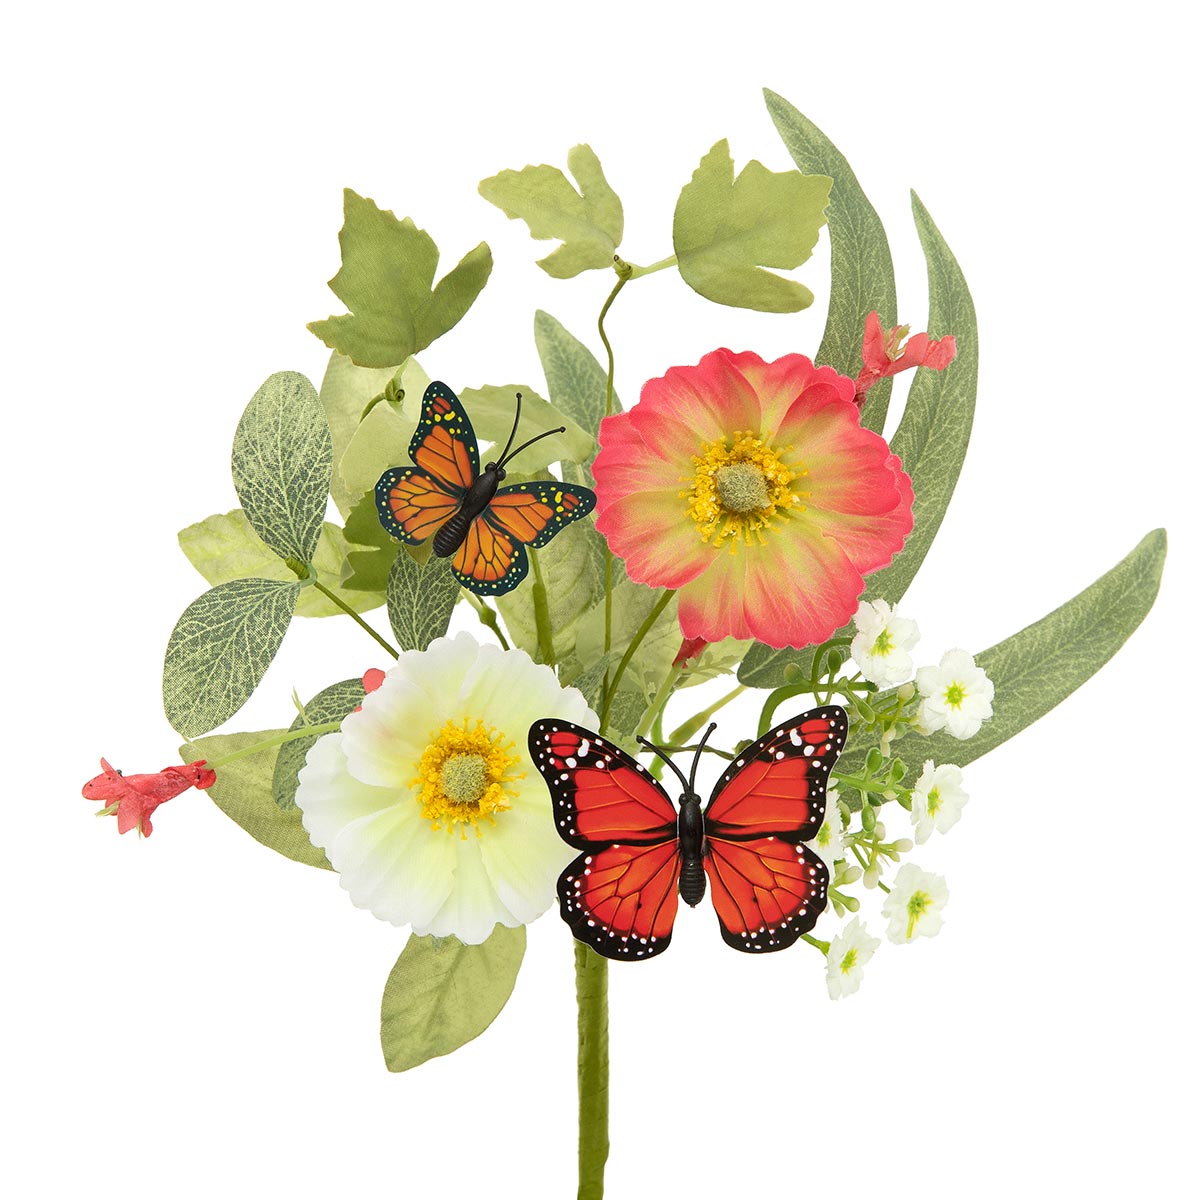 Coral Fair POPPY AND BUTTERFLY PIK 9"x11"